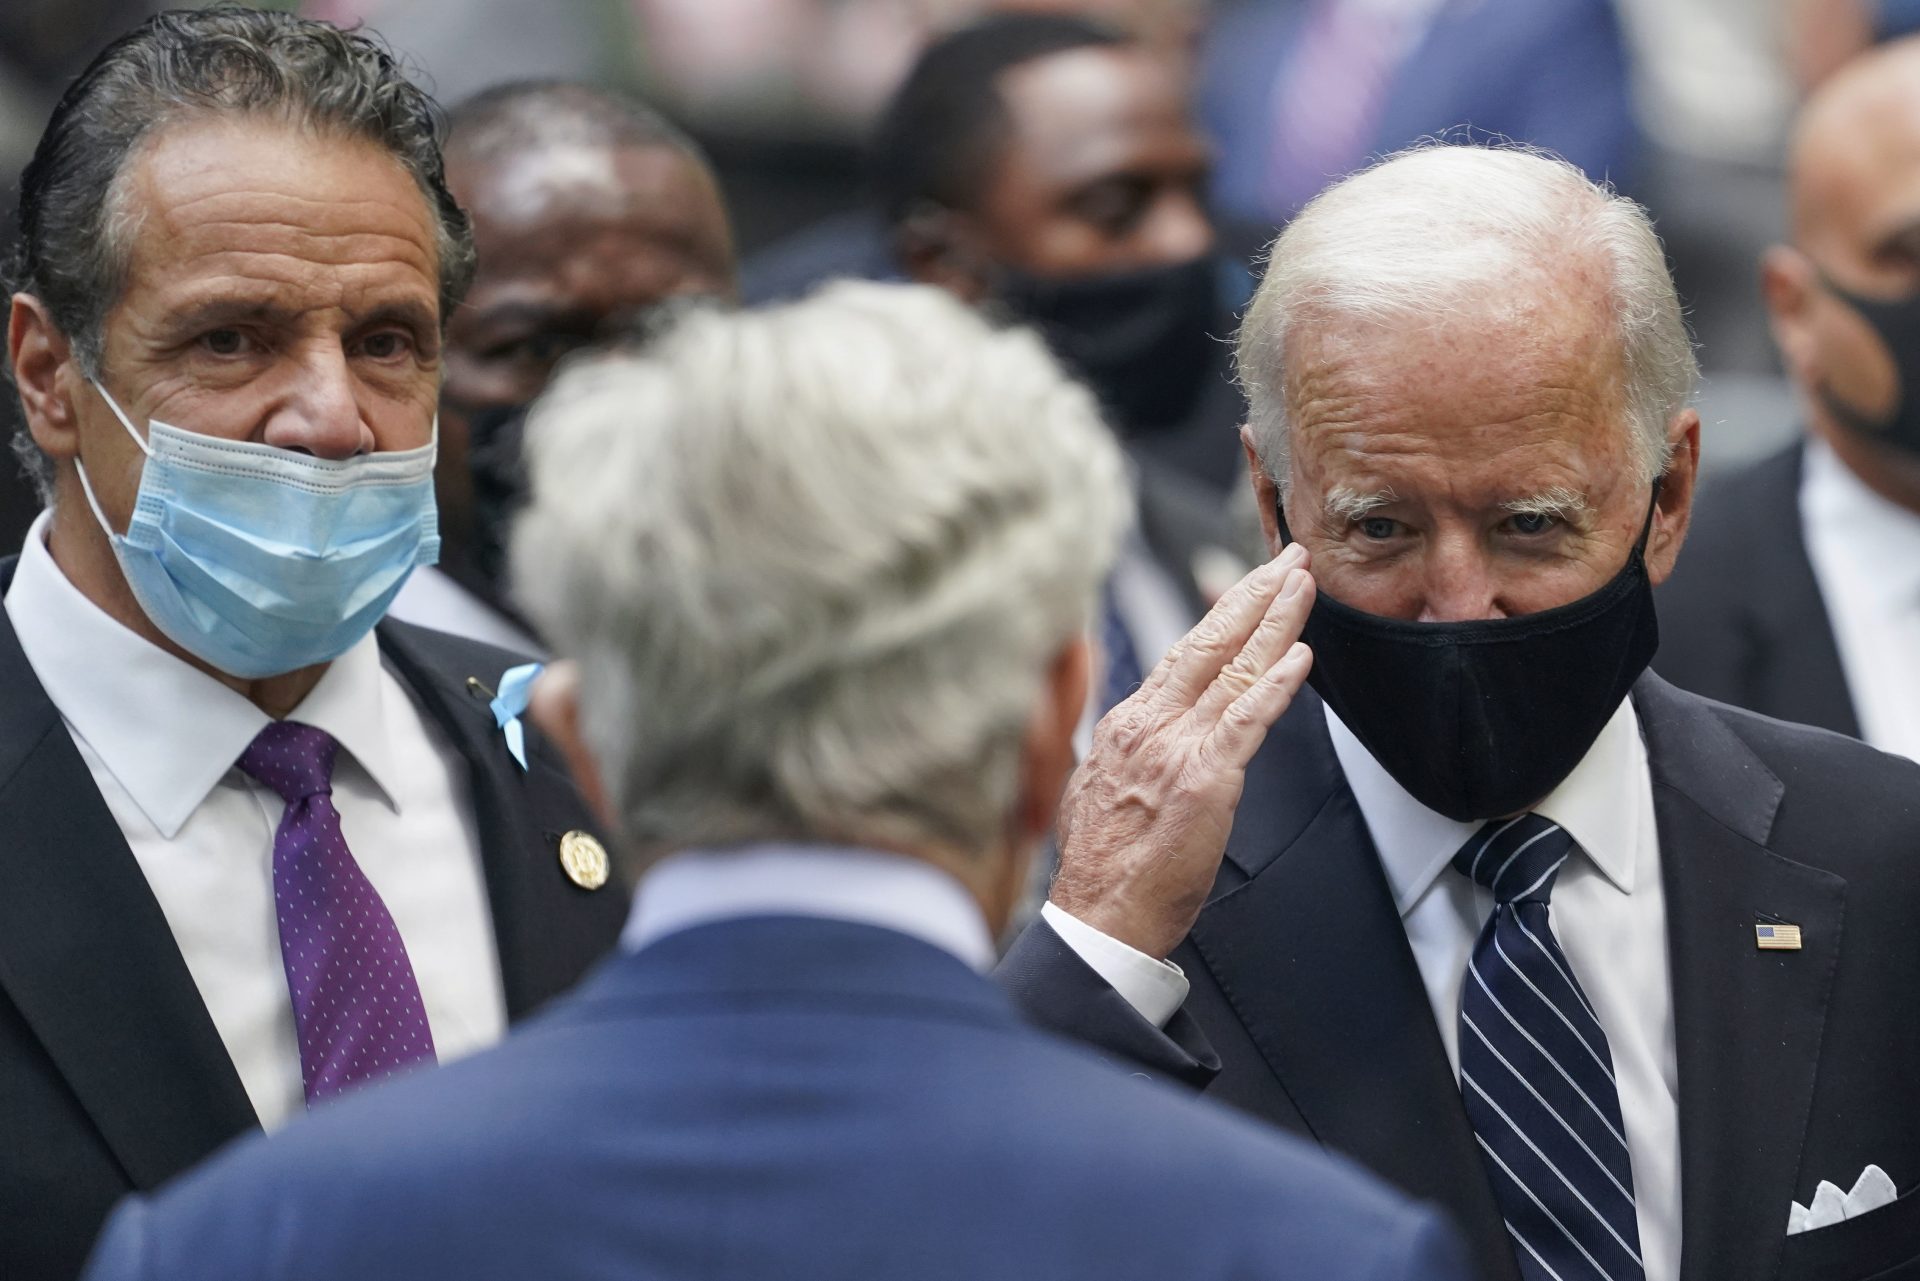 Democratic presidential candidate and former Vice President Joe Biden, salutes a guest alongside New York Gov. Andrew Cuomo, left, at the National September 11 Memorial and Museum, Friday, Sept. 11, 2020, in New York. Americans will commemorate 9/11 with tributes that have been altered by coronavirus precautions and woven into the presidential campaign.